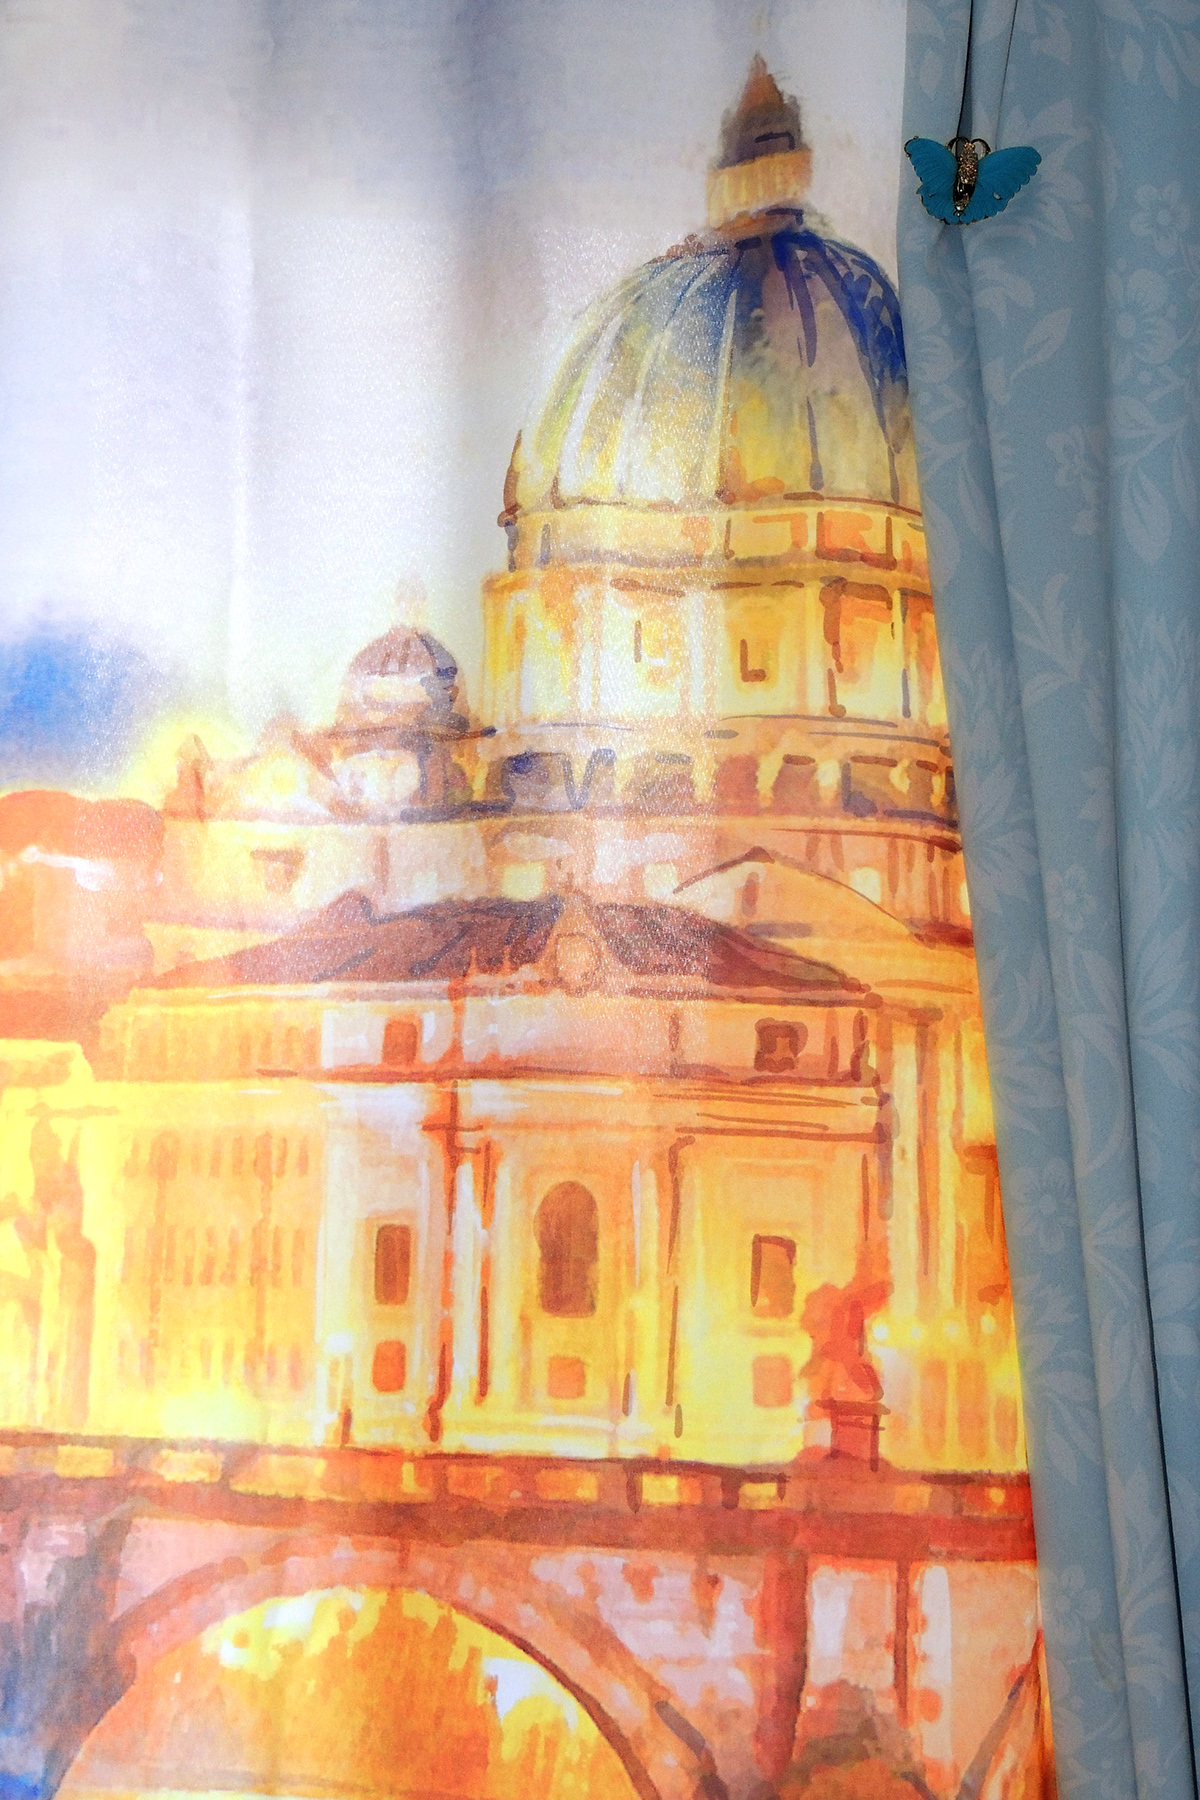 curtains world cities Printing on fabric for an interior watercolor aqwarelle paint painrer art artist